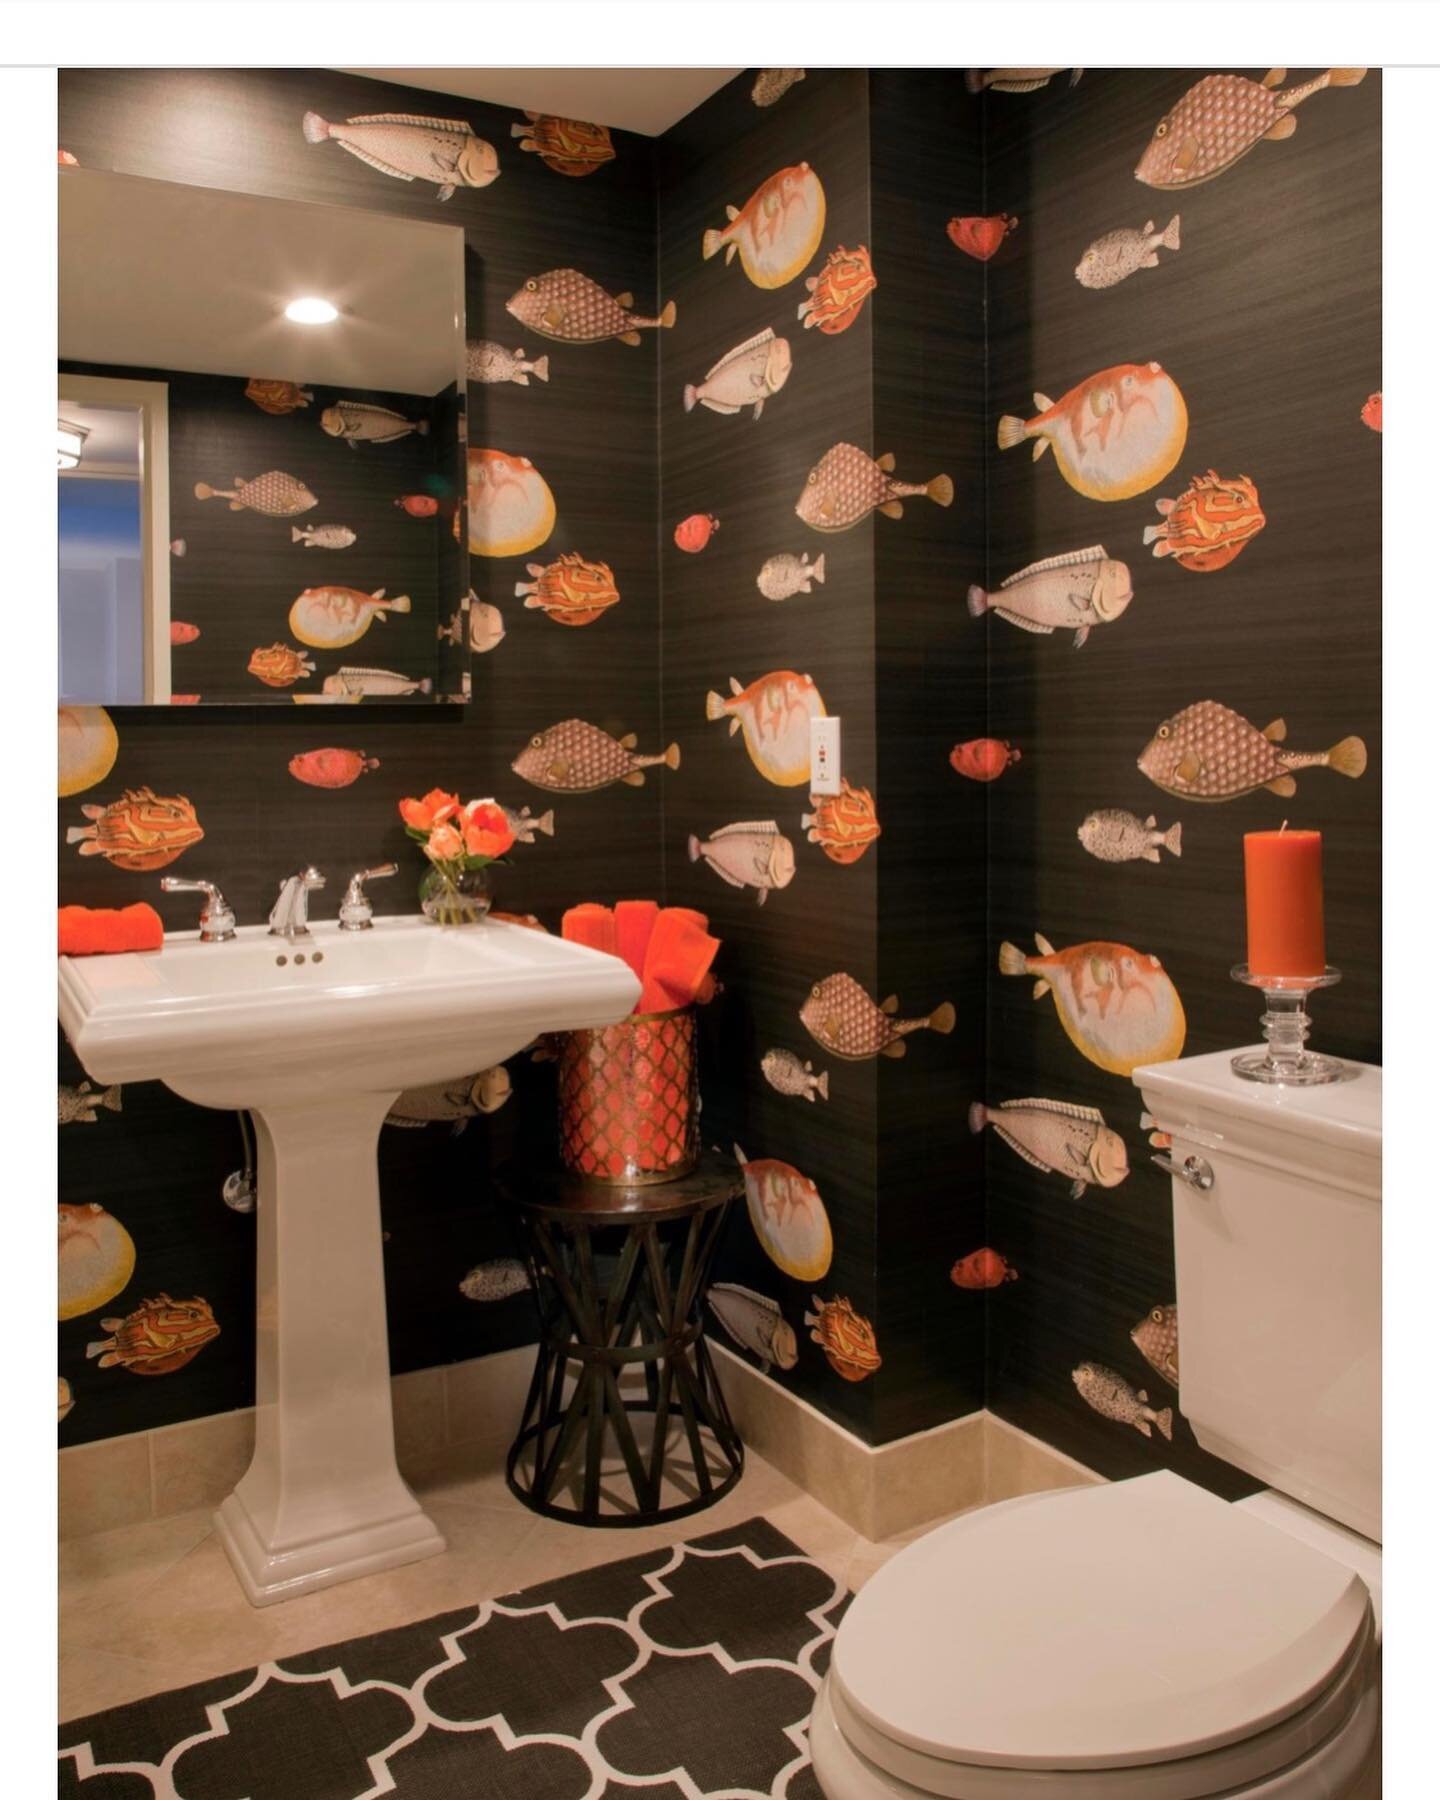 Including us in your article Powder Room Perfection is much appreciated @chairishco 🧡🖤 #classicinteriordesign #traditionalhome #powderroom #bathroom #wallpaper #foranasettiwallpaper  #colorpatterntexture Designed by: @doreenchambersinteriors Photog